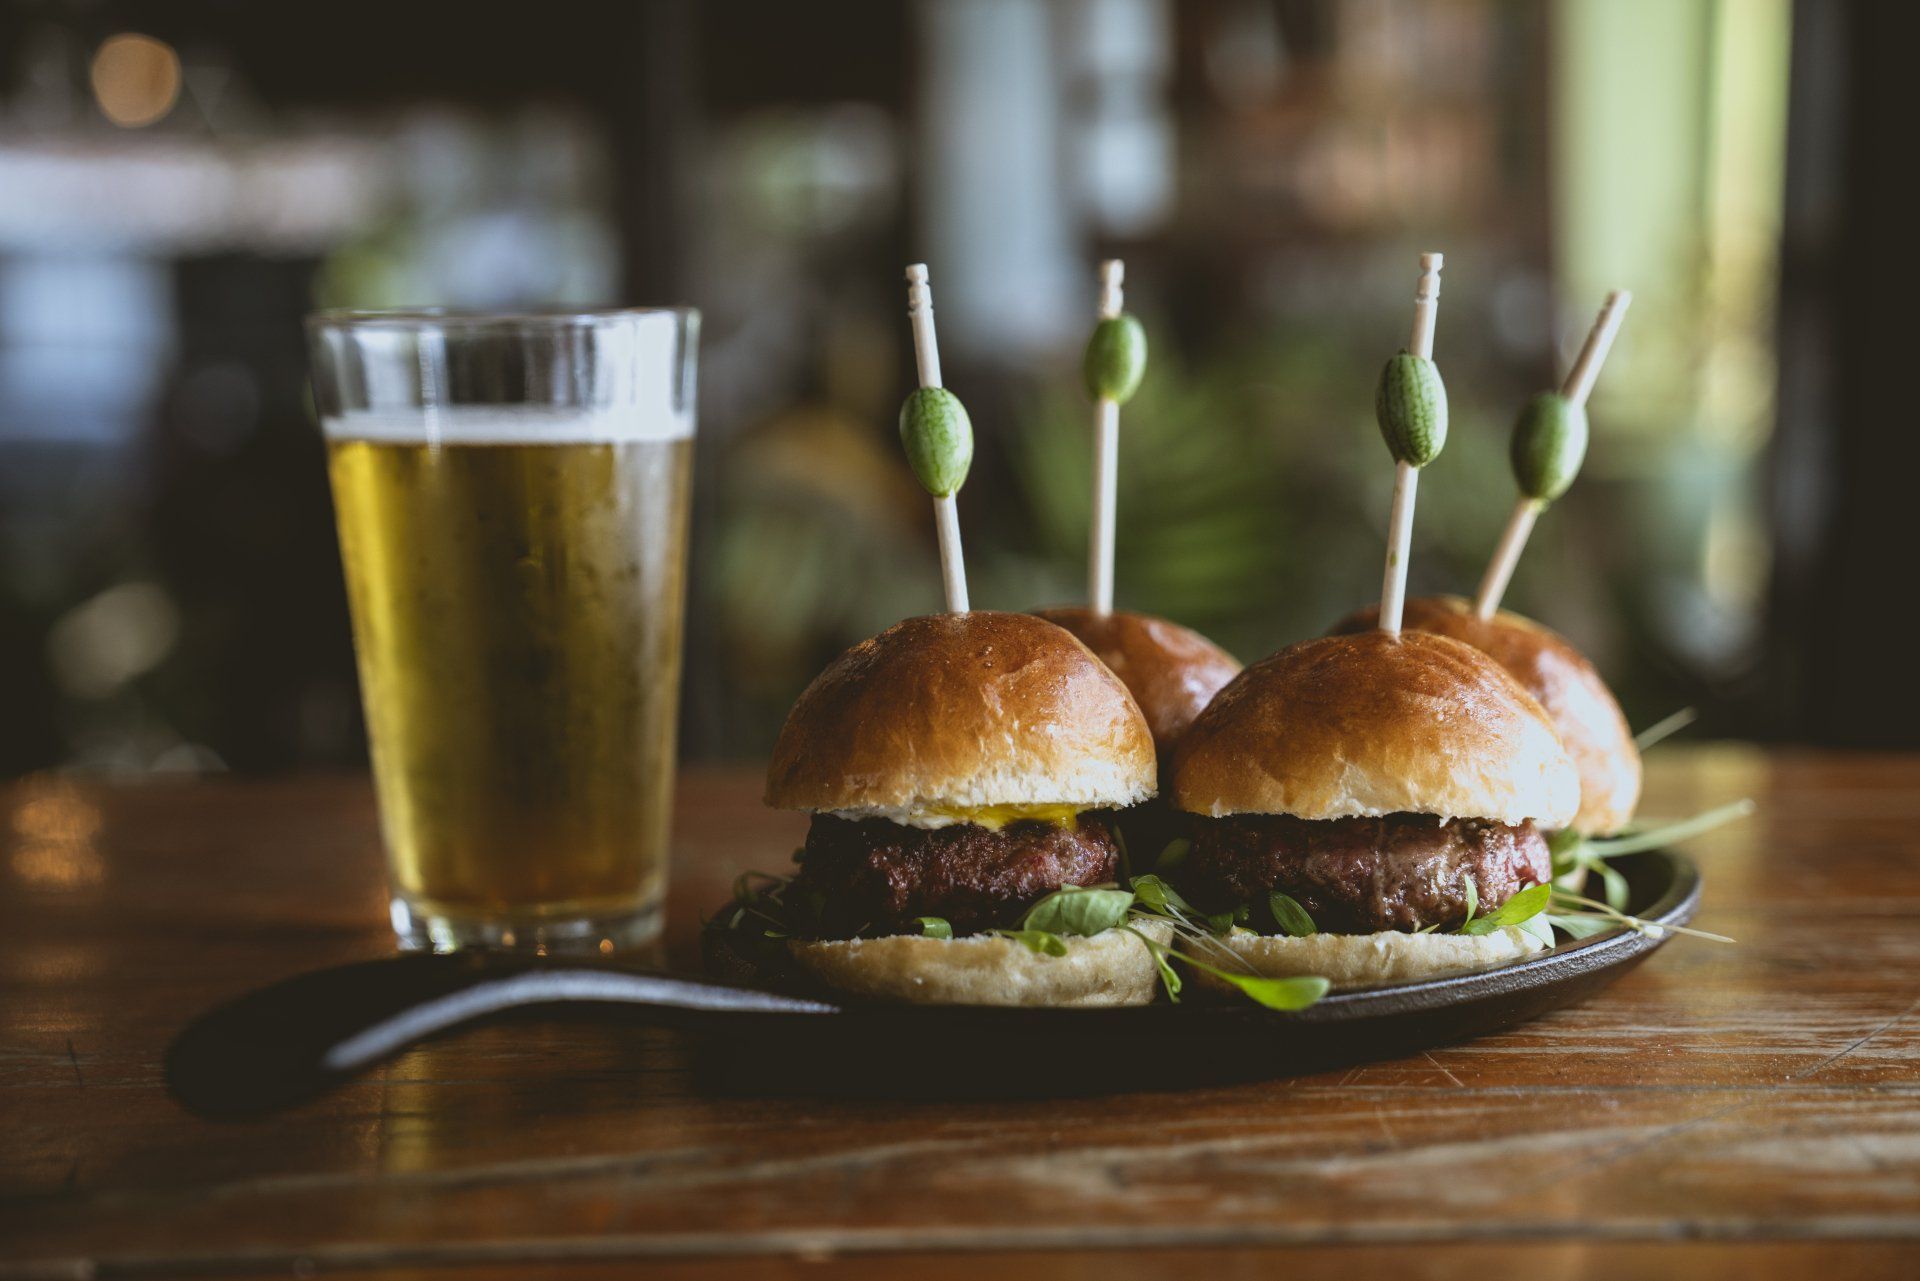 A plate of sliders and a glass of beer on a wooden table.